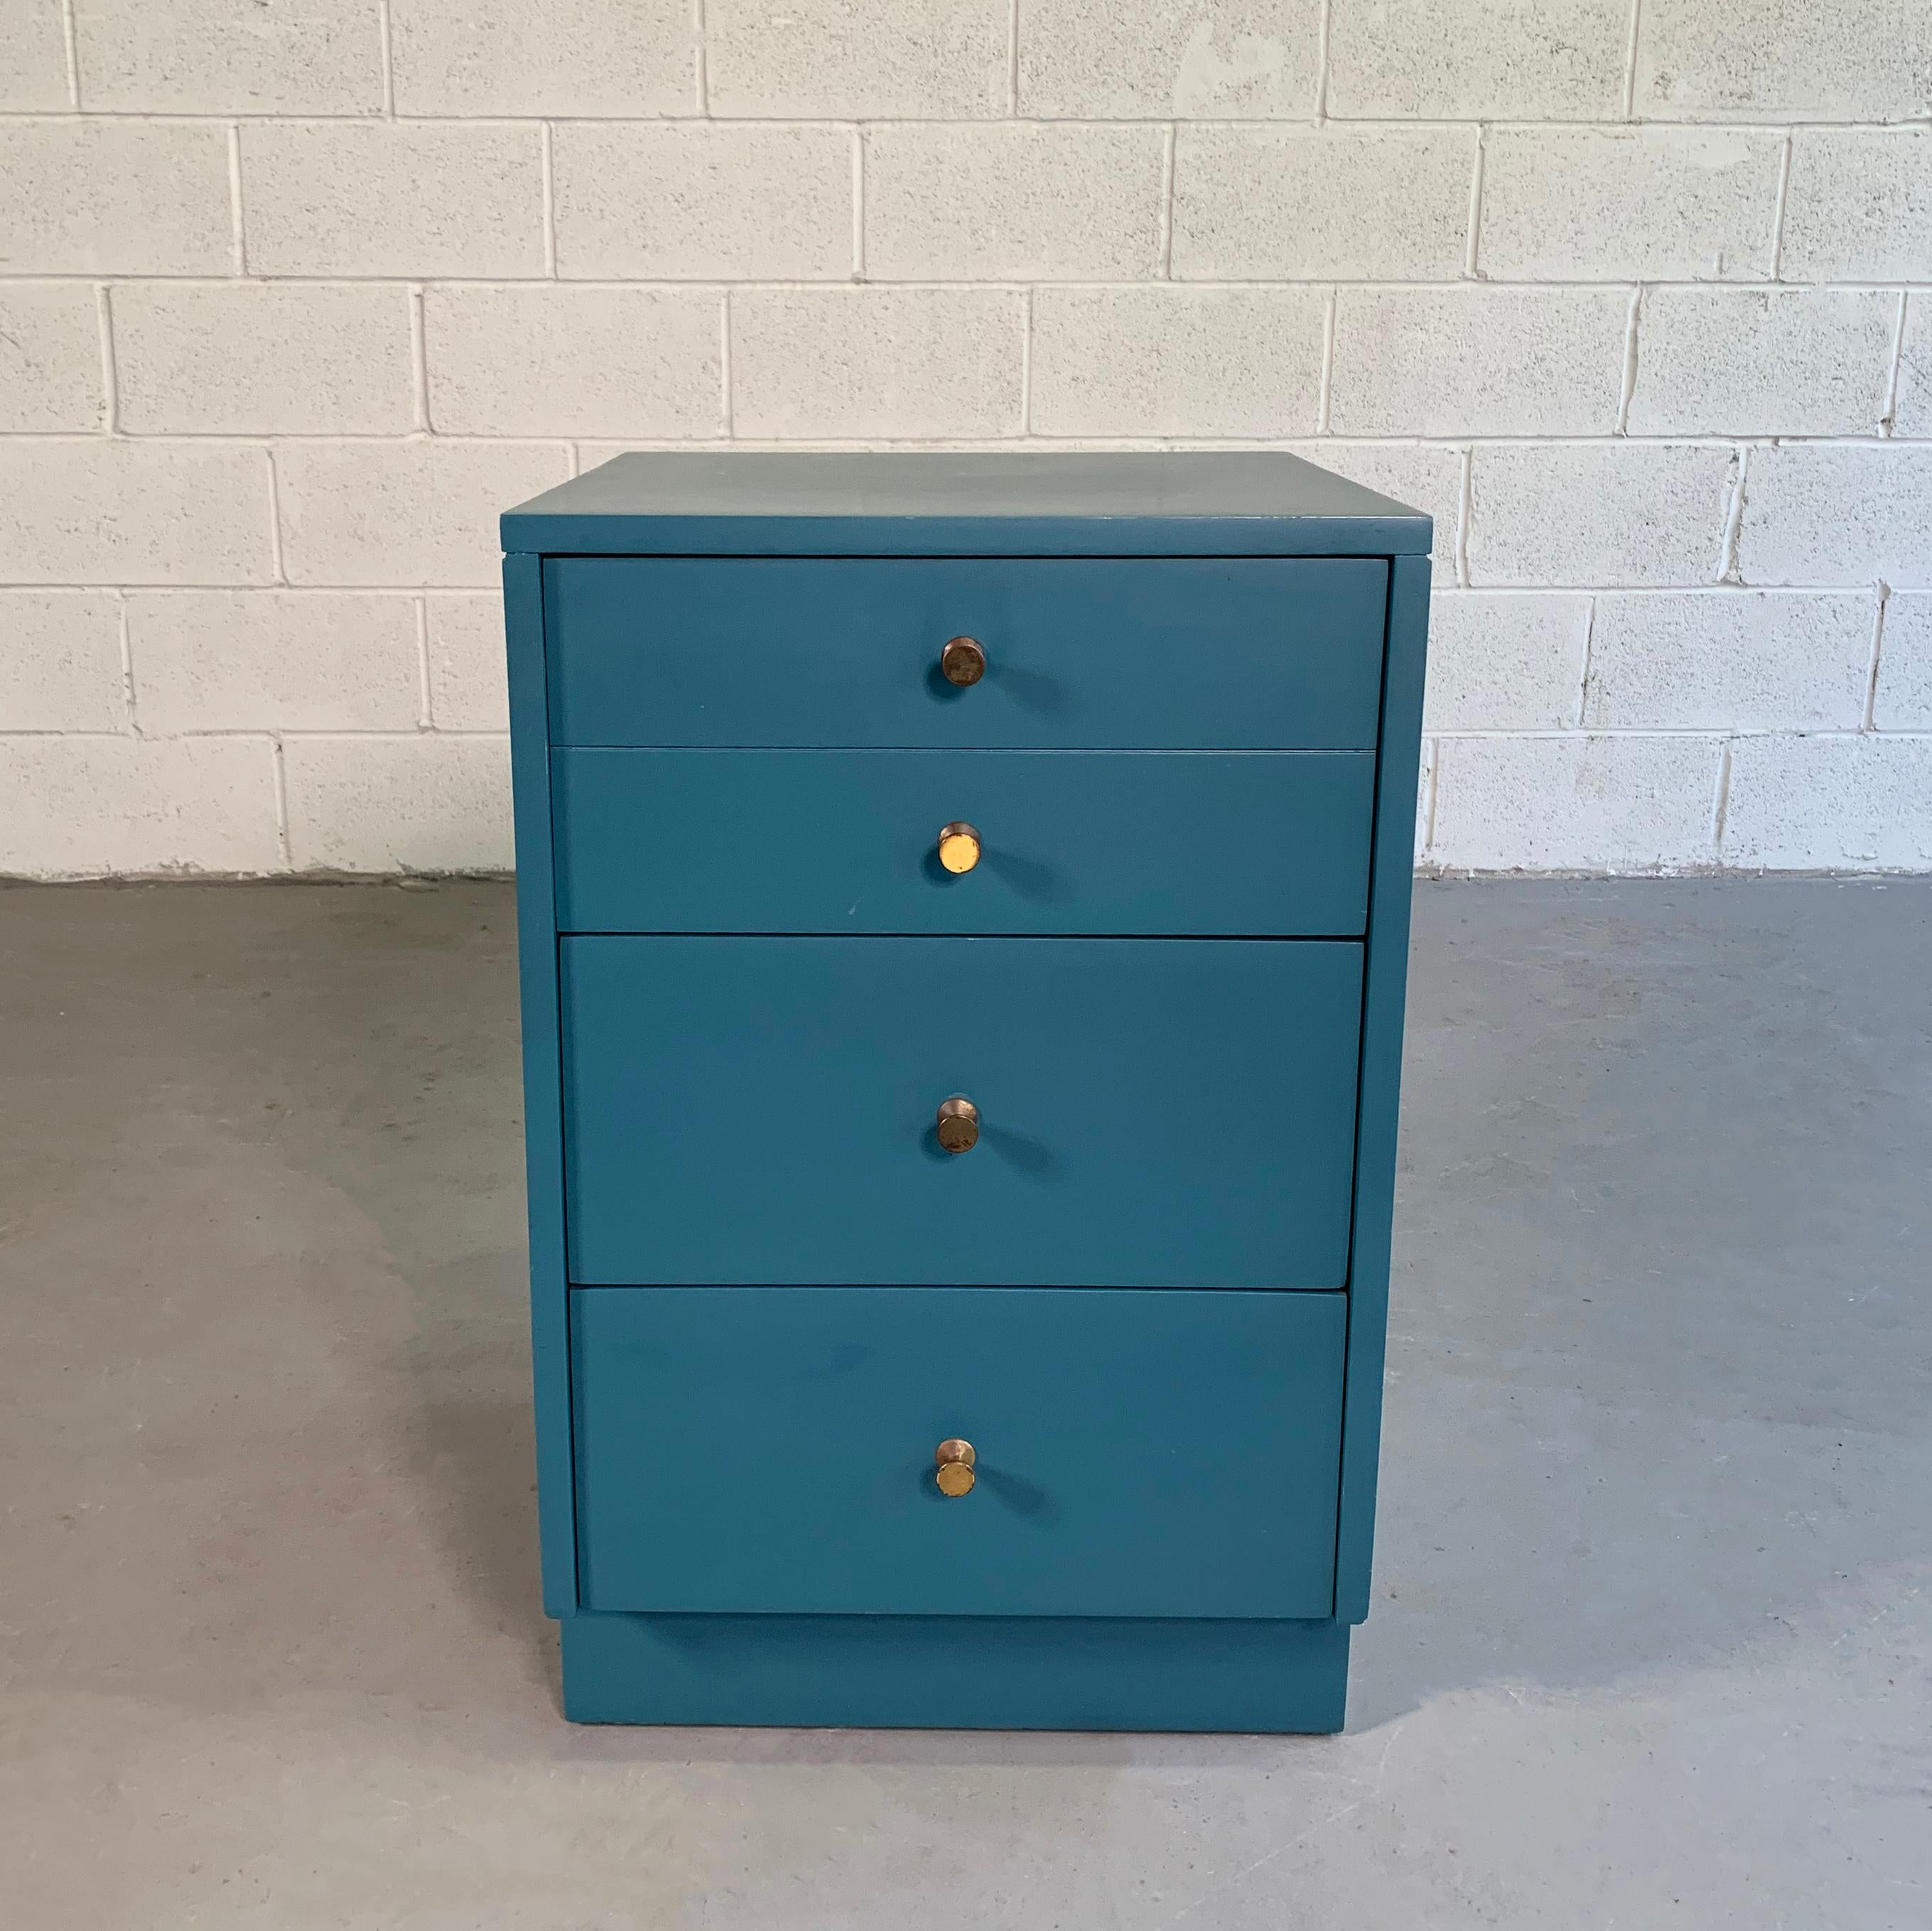 Mid-Century Modern, petite dresser is lacquered blue chestnut drawers with three 7.75 inches height drawers with brass pulls. This versatile piece also works as a tall nightstand or end table.